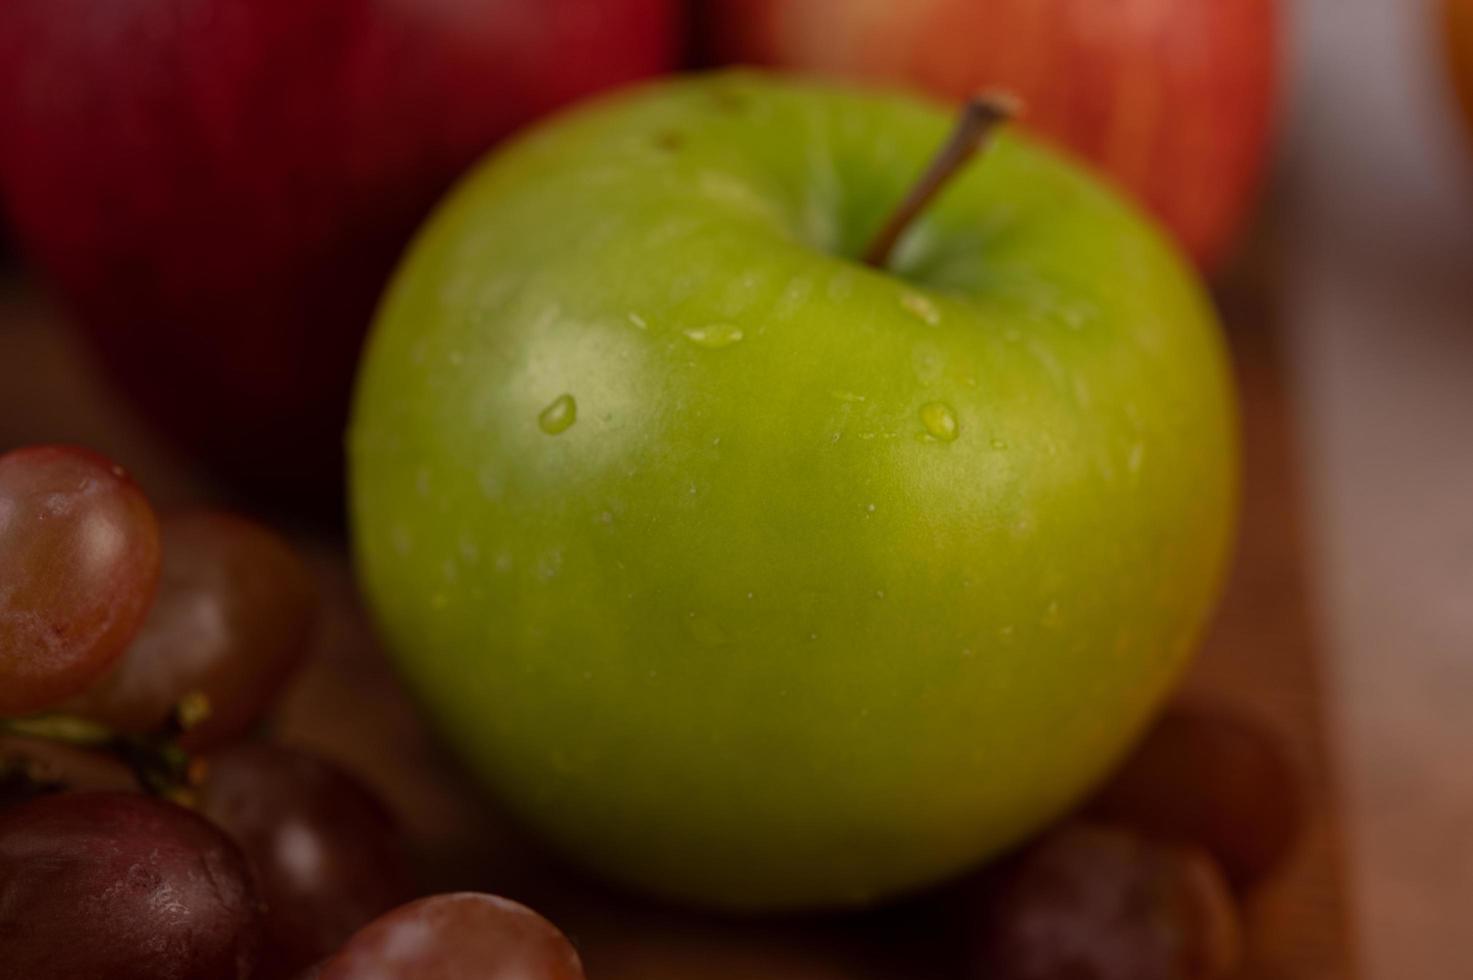 Close-up of a green apple photo